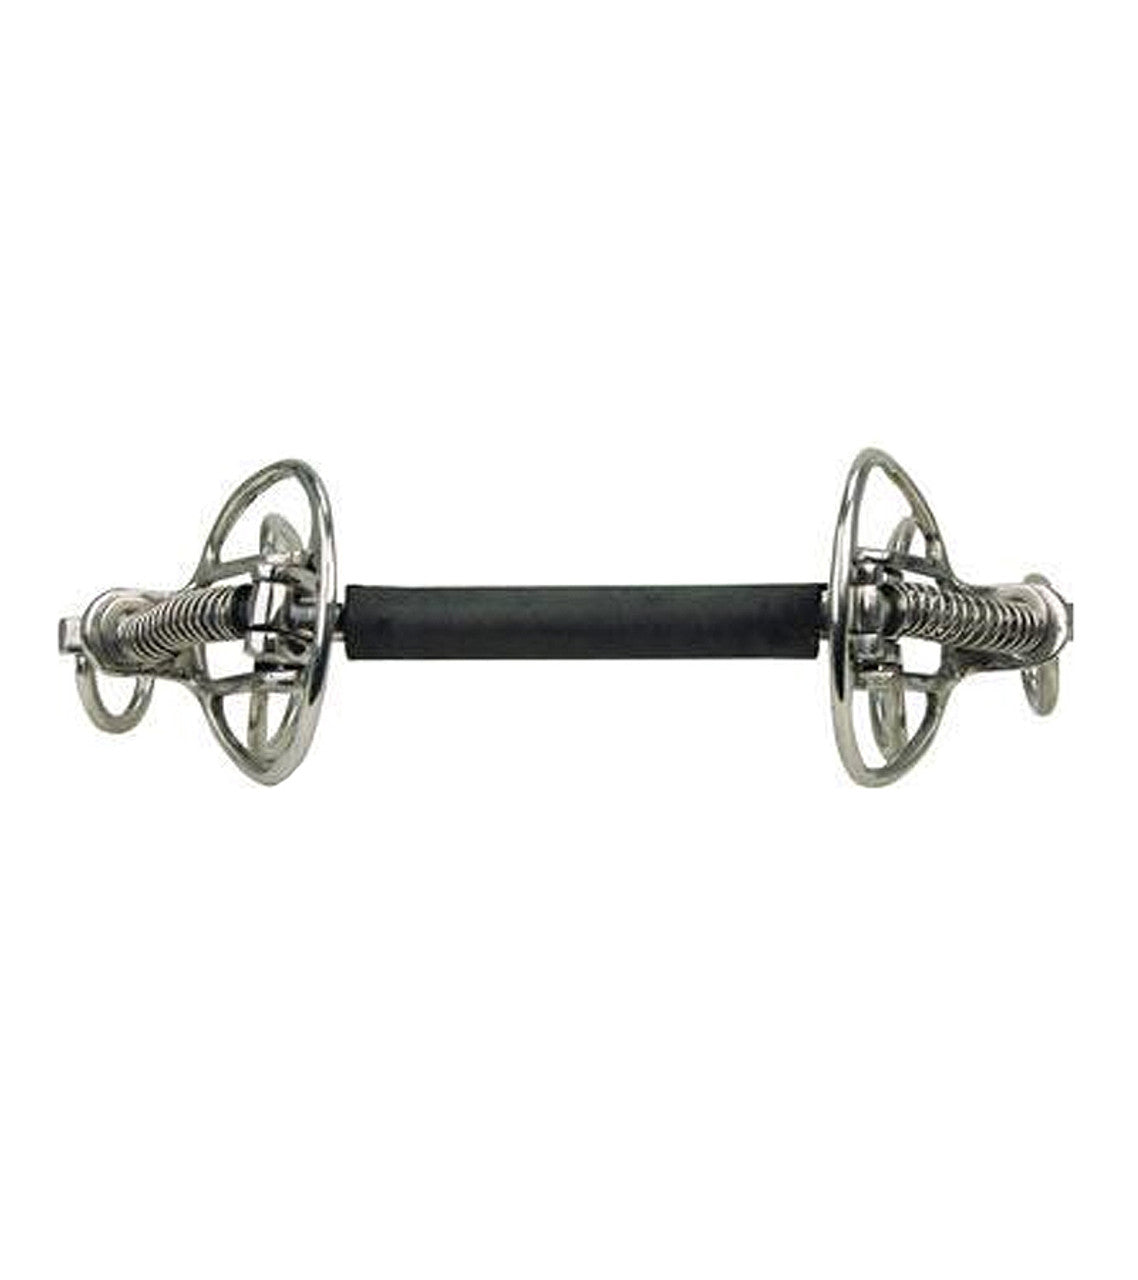 Puller Spring Bit with Rubber Mouth-TexanSaddles.com